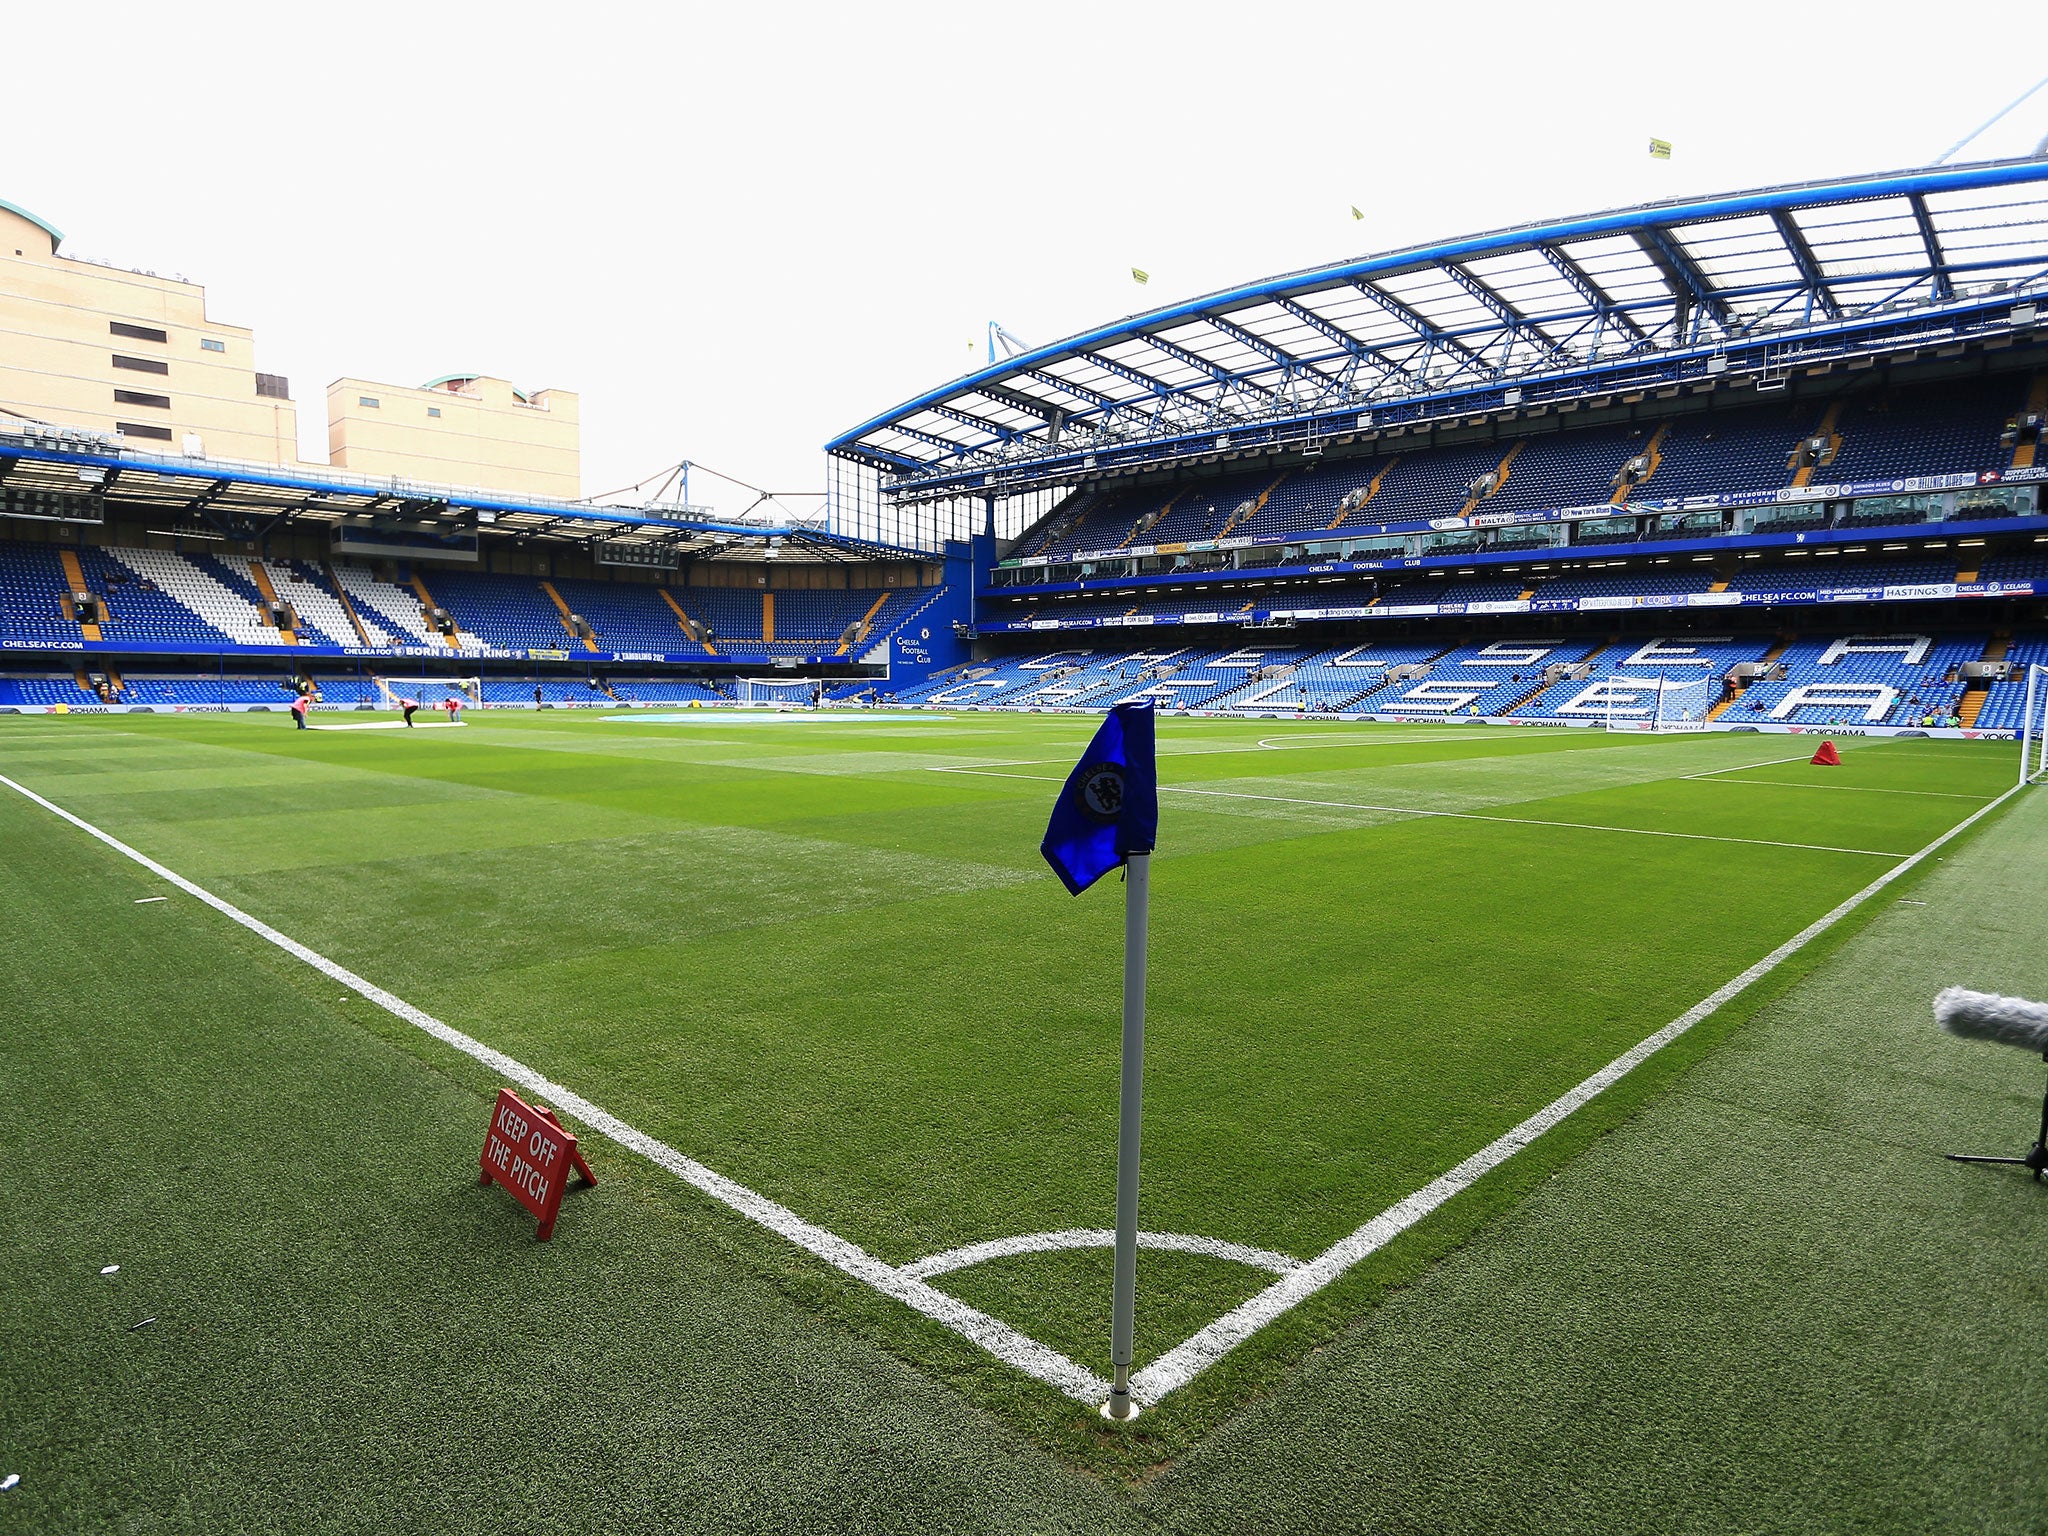 Stamford Bridge will see its capacity now increase to 60,000